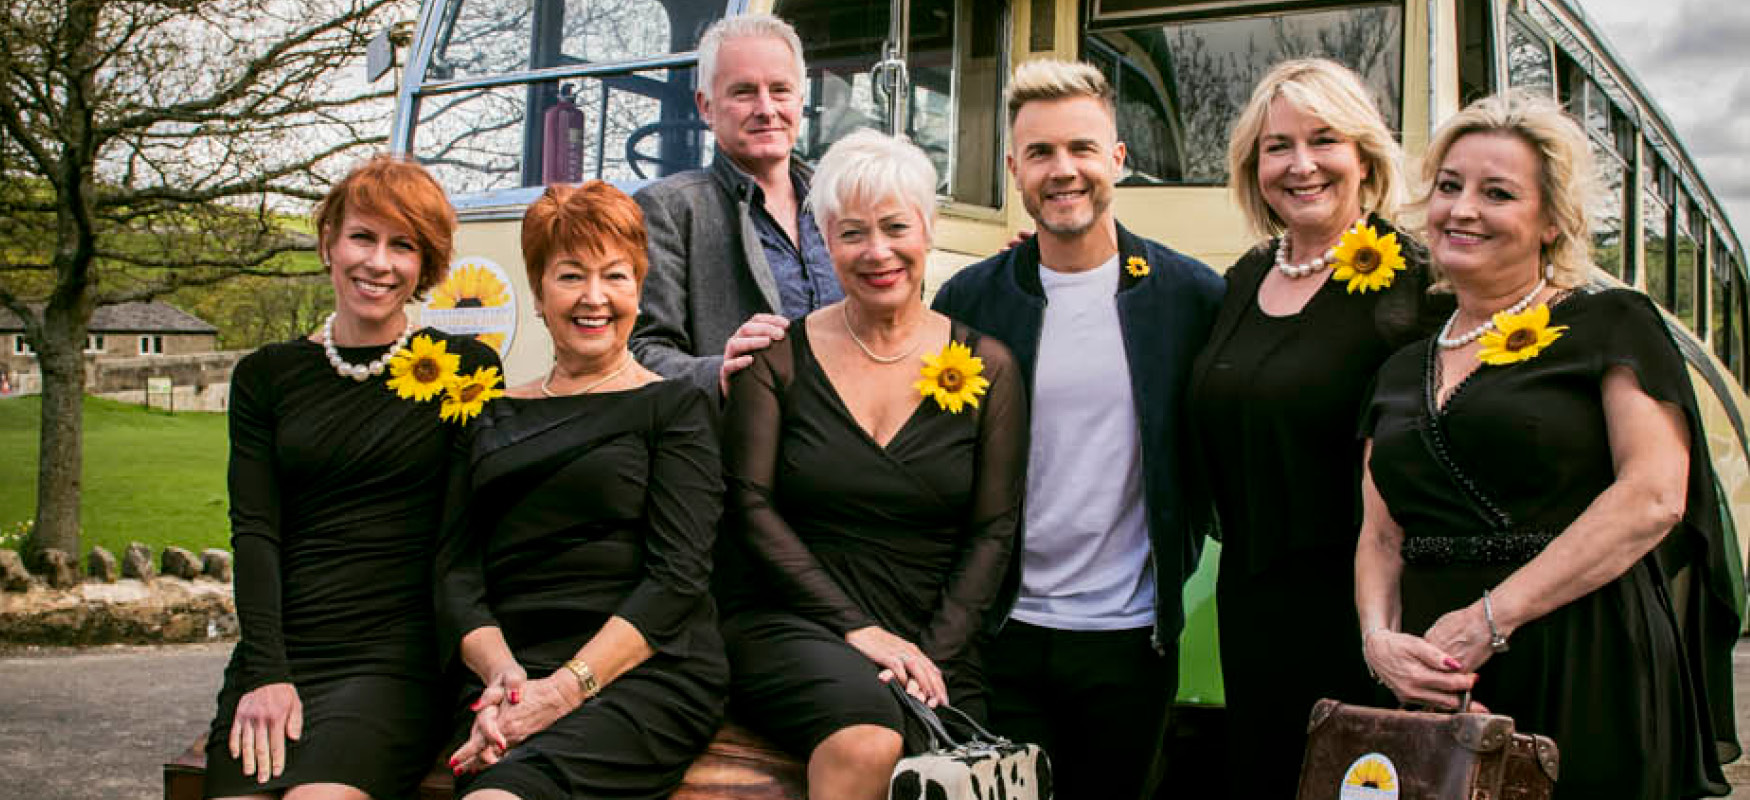 calendar girls, woking, surrey, whats on, where to go, things to do, calendar girls, new victoria theatre